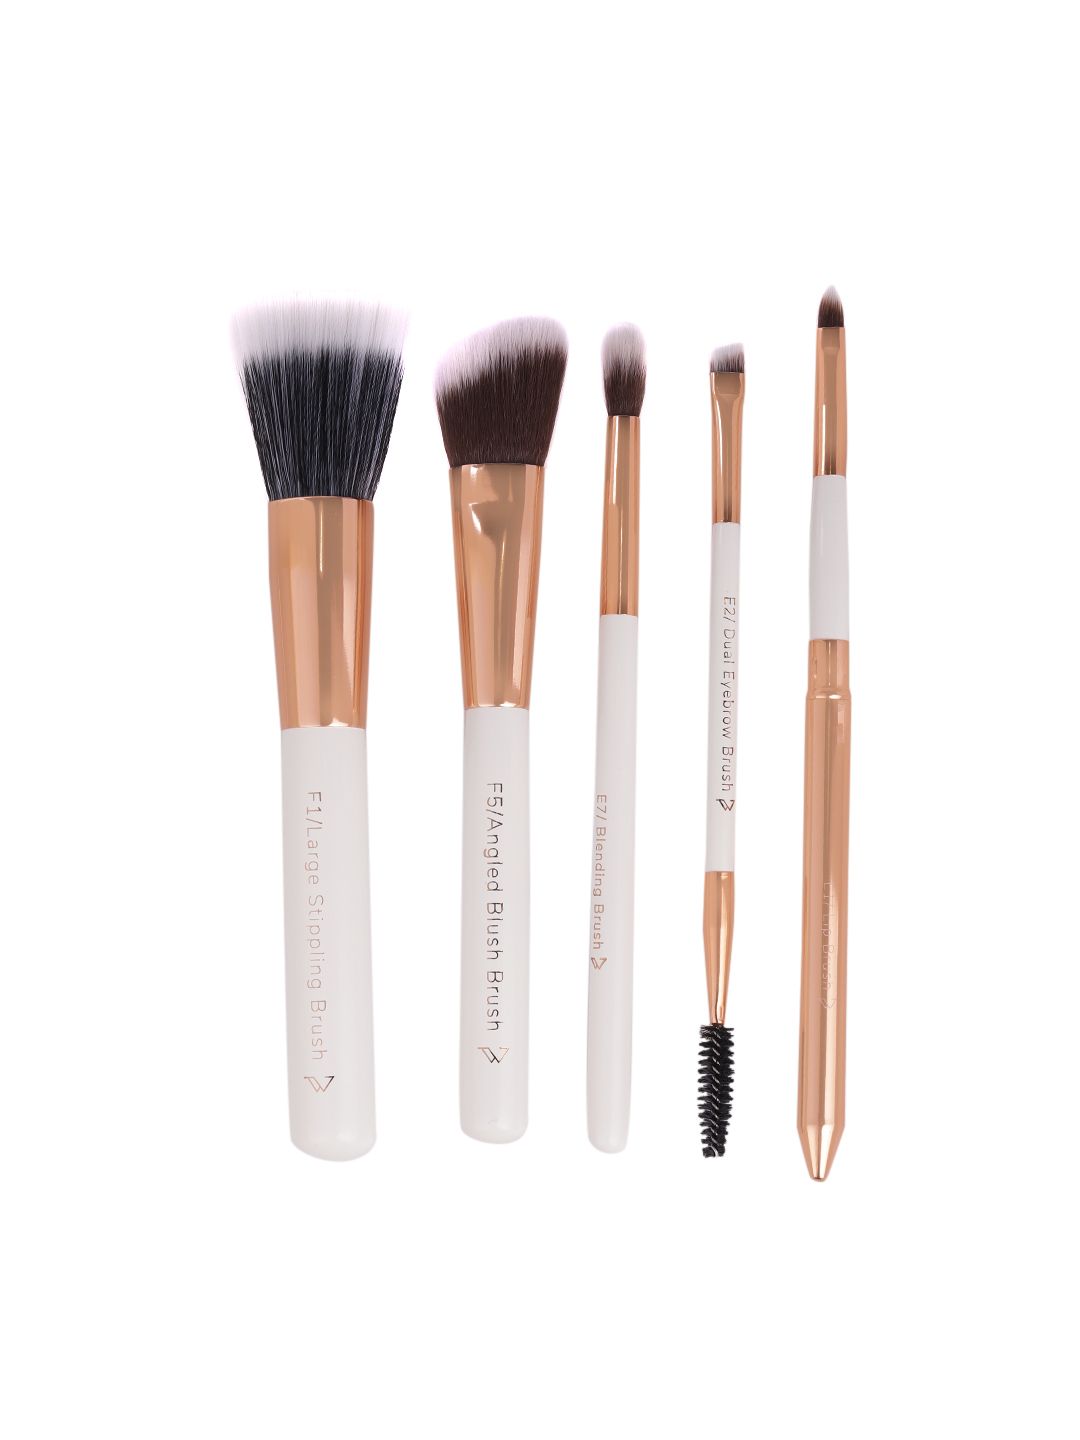 Pigment Play Set of 5 Starter Makeup Brushes Price in India